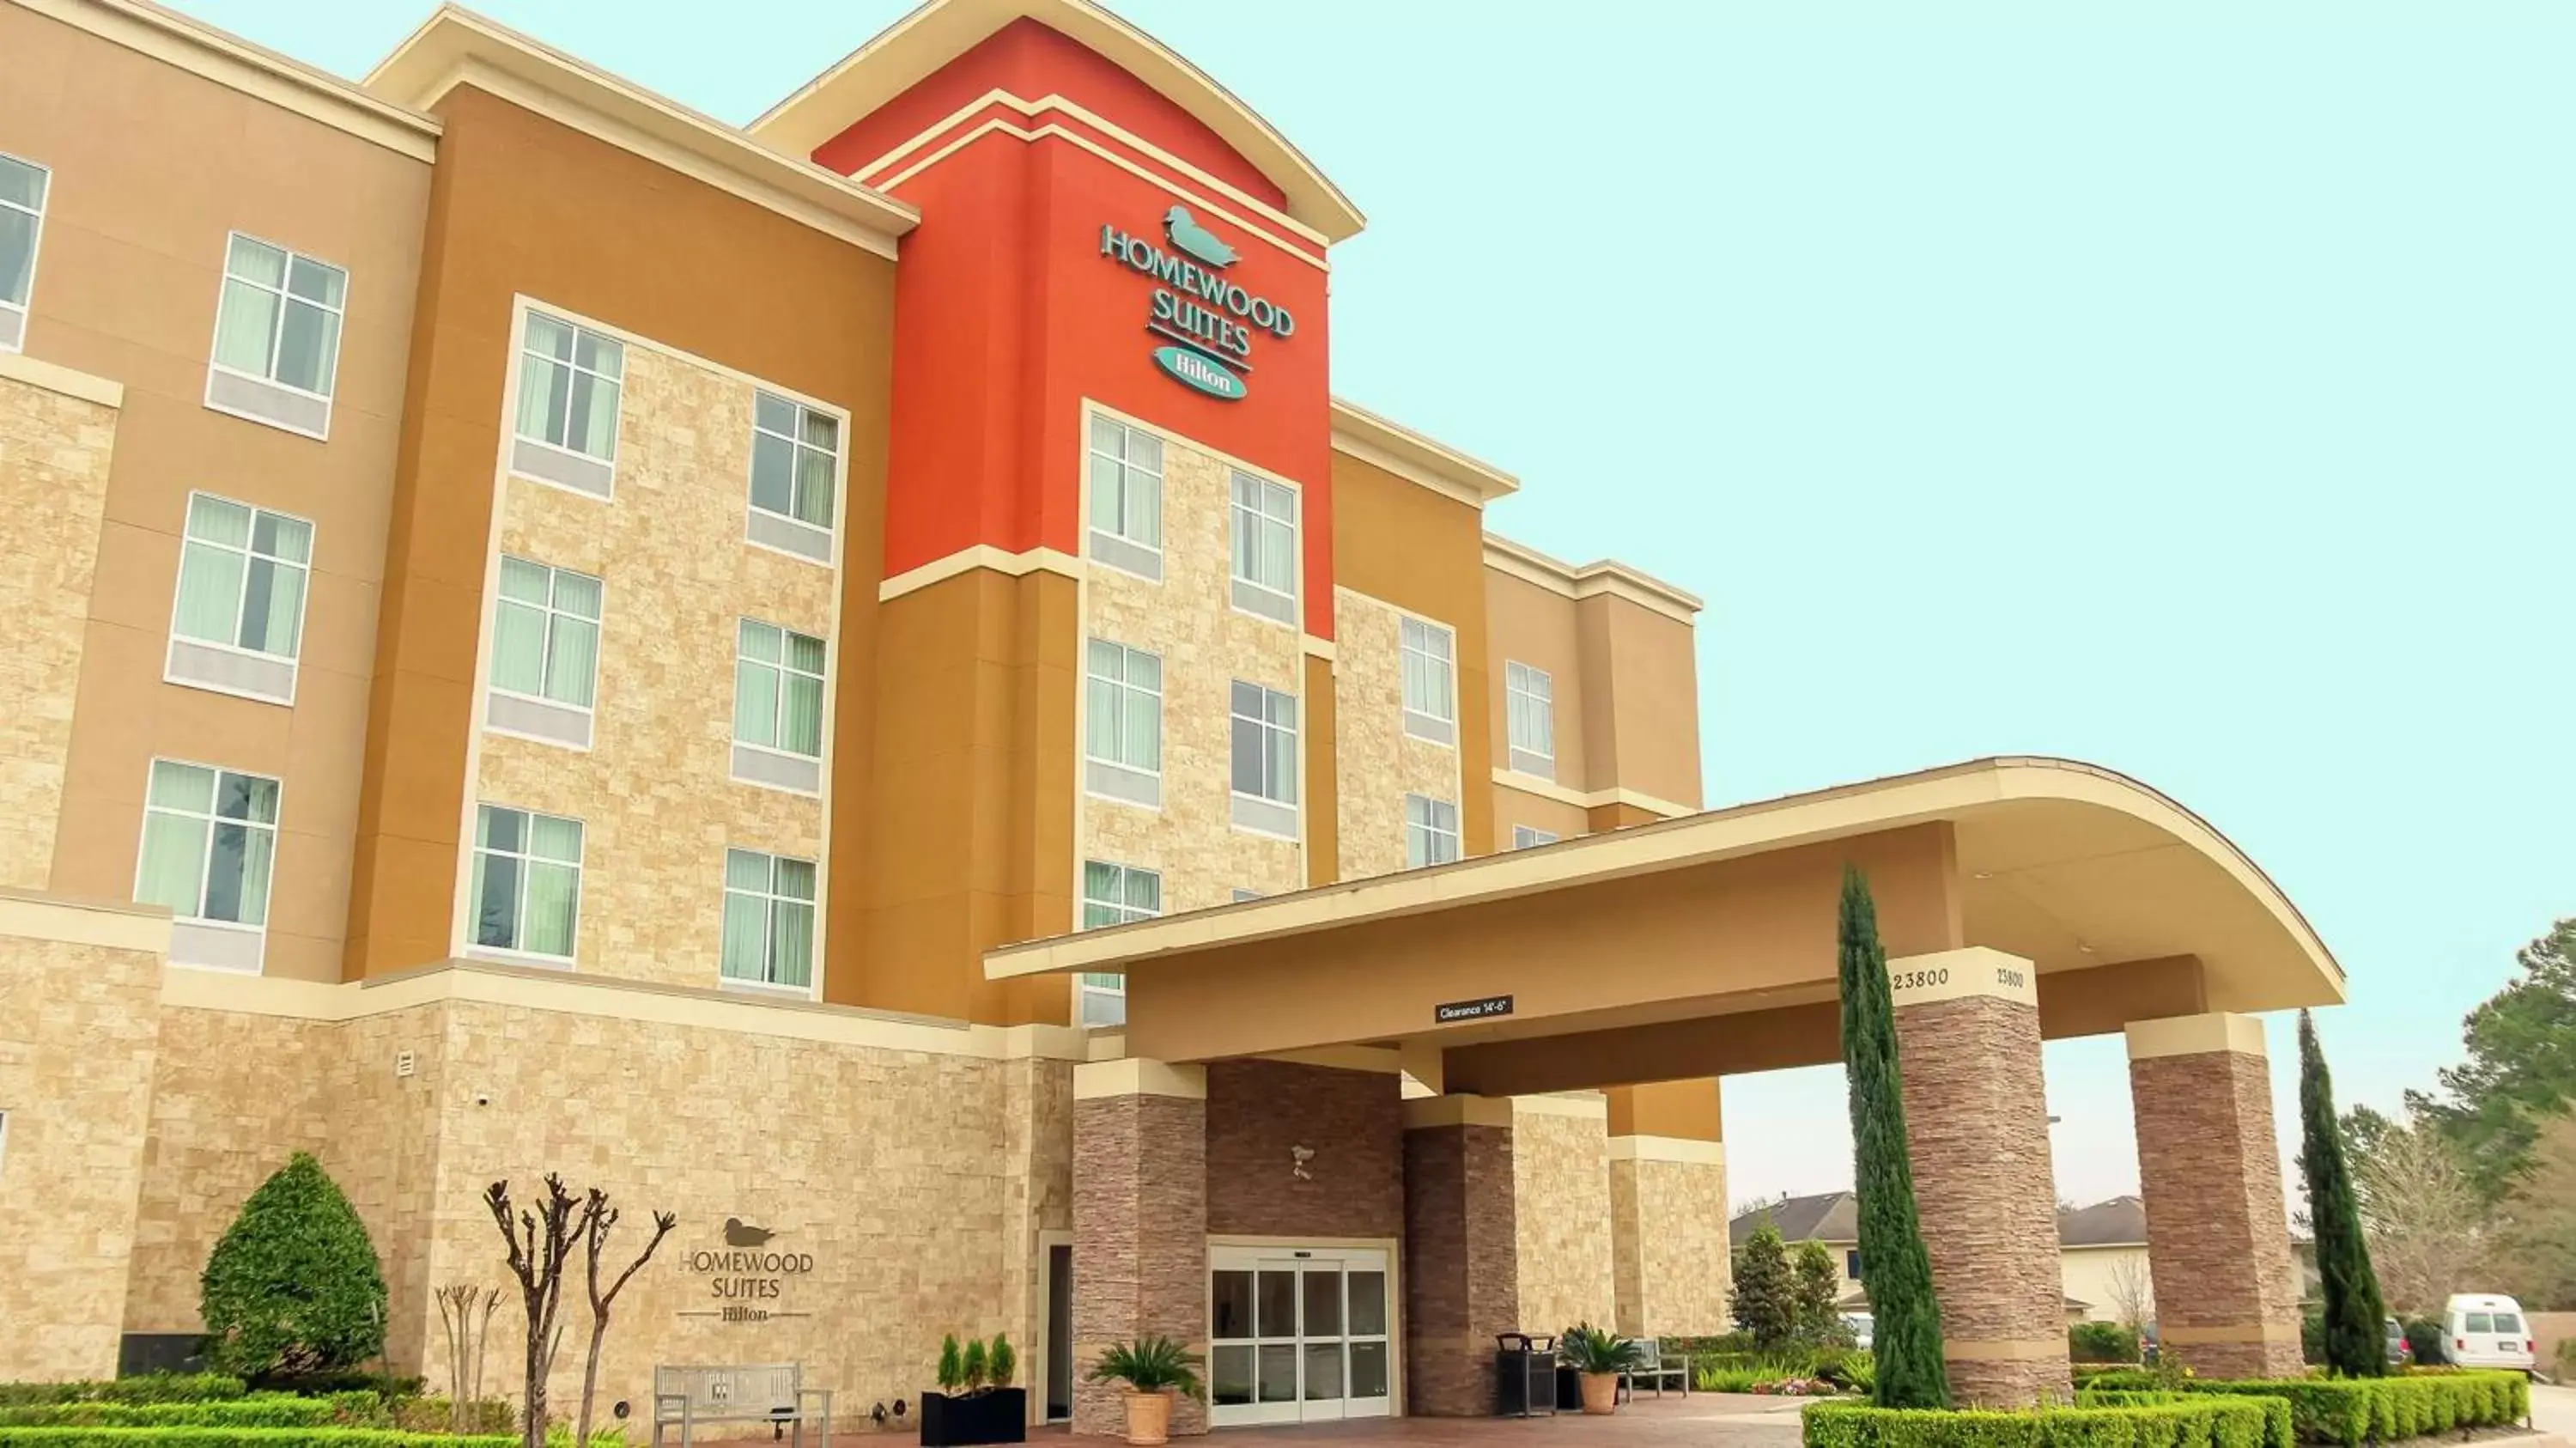 Property Building in Homewood Suites by Hilton North Houston/Spring